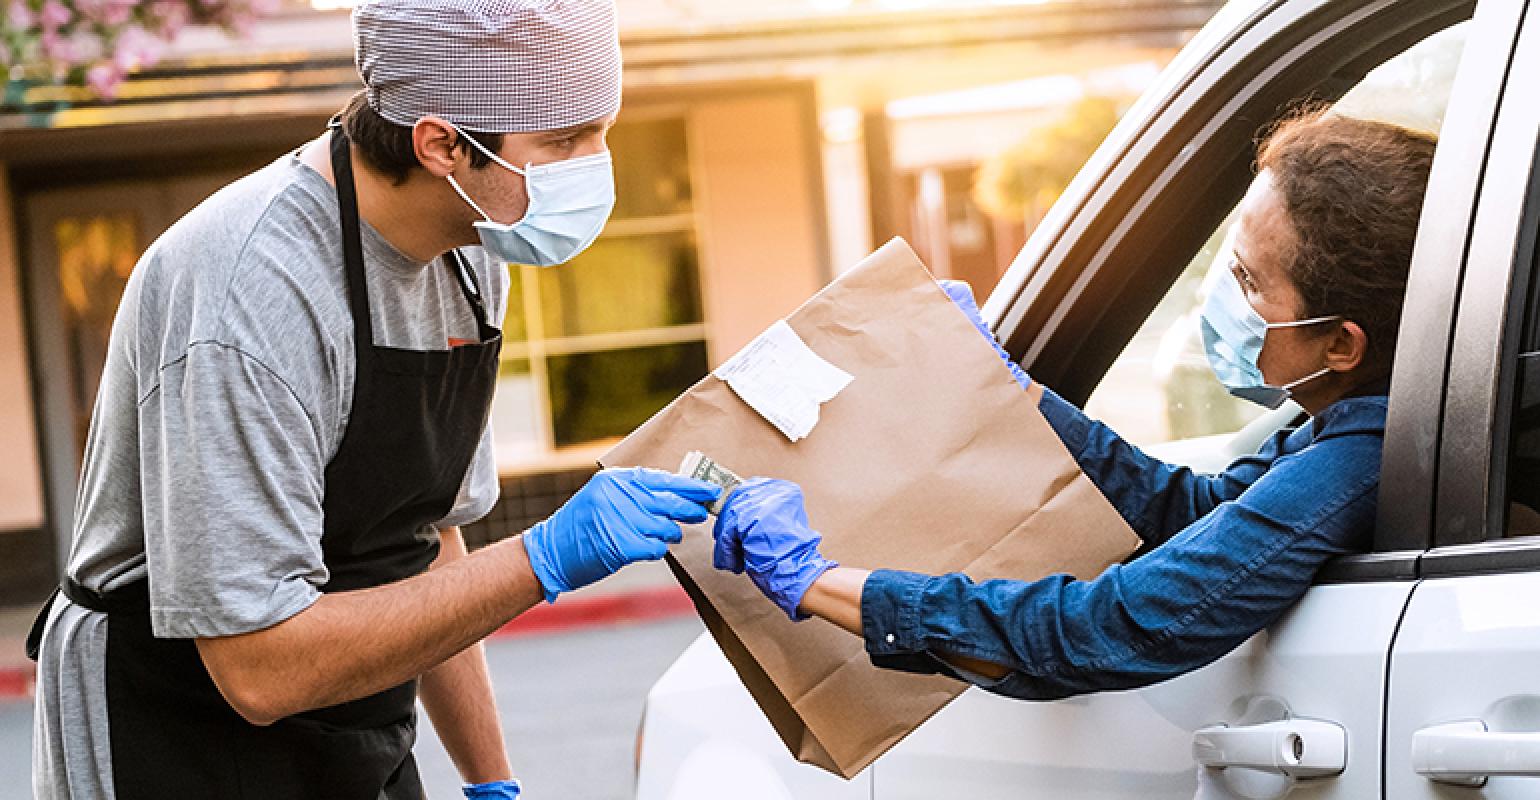 Pandemic spurred curbside delivery innovations | Restaurant Hospitality